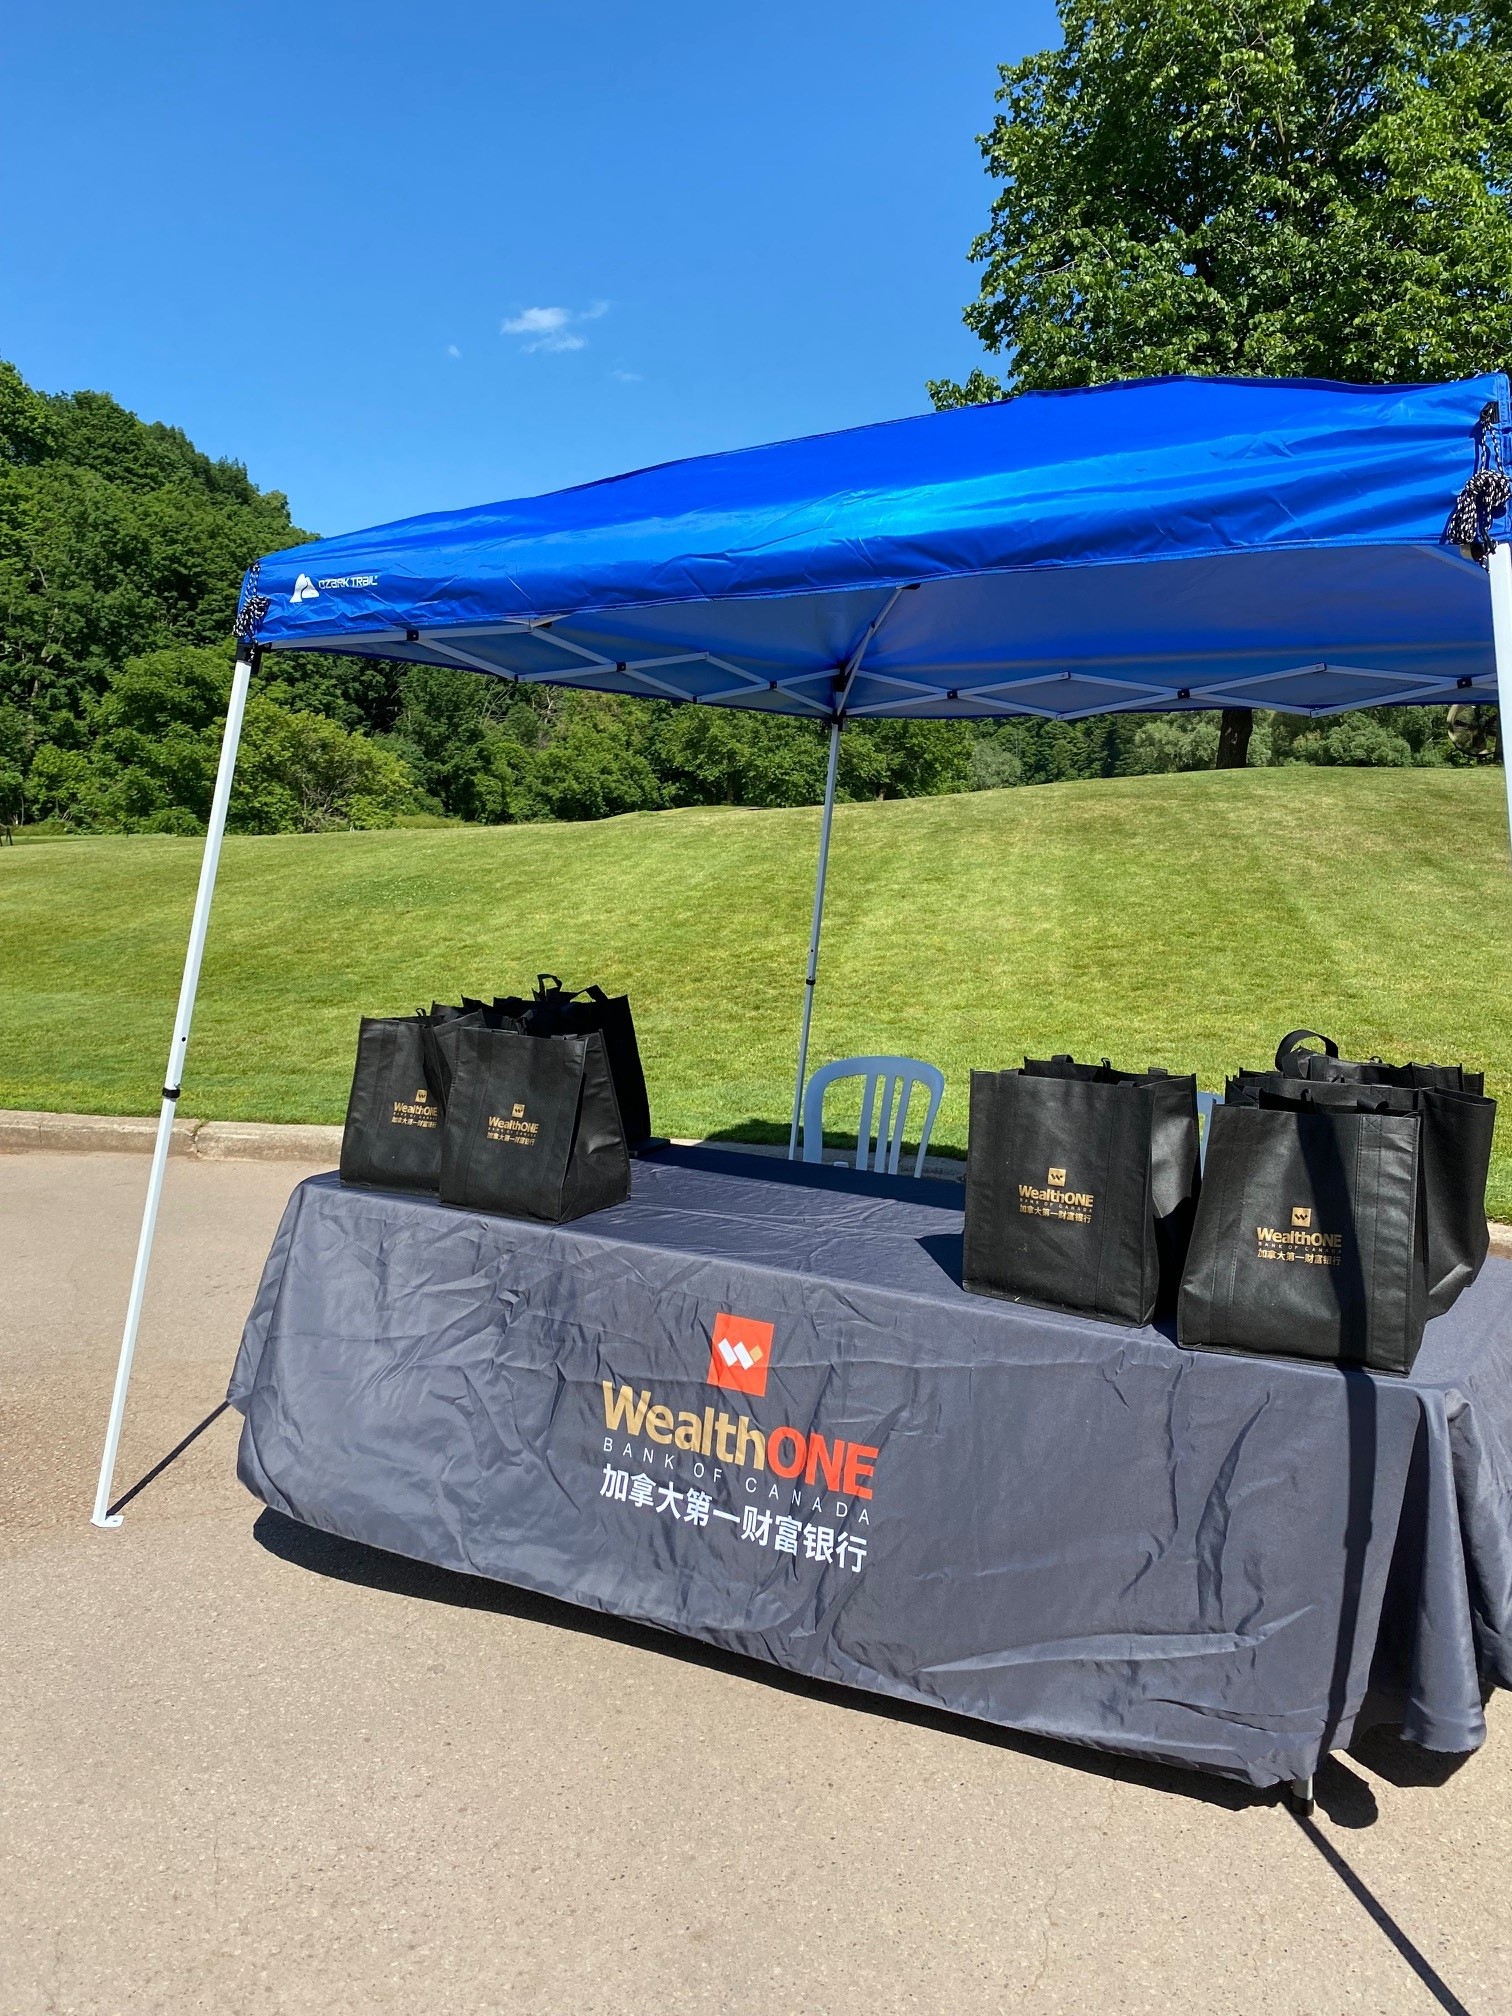 WealthONE tent and gift bags by the sponsored hole 